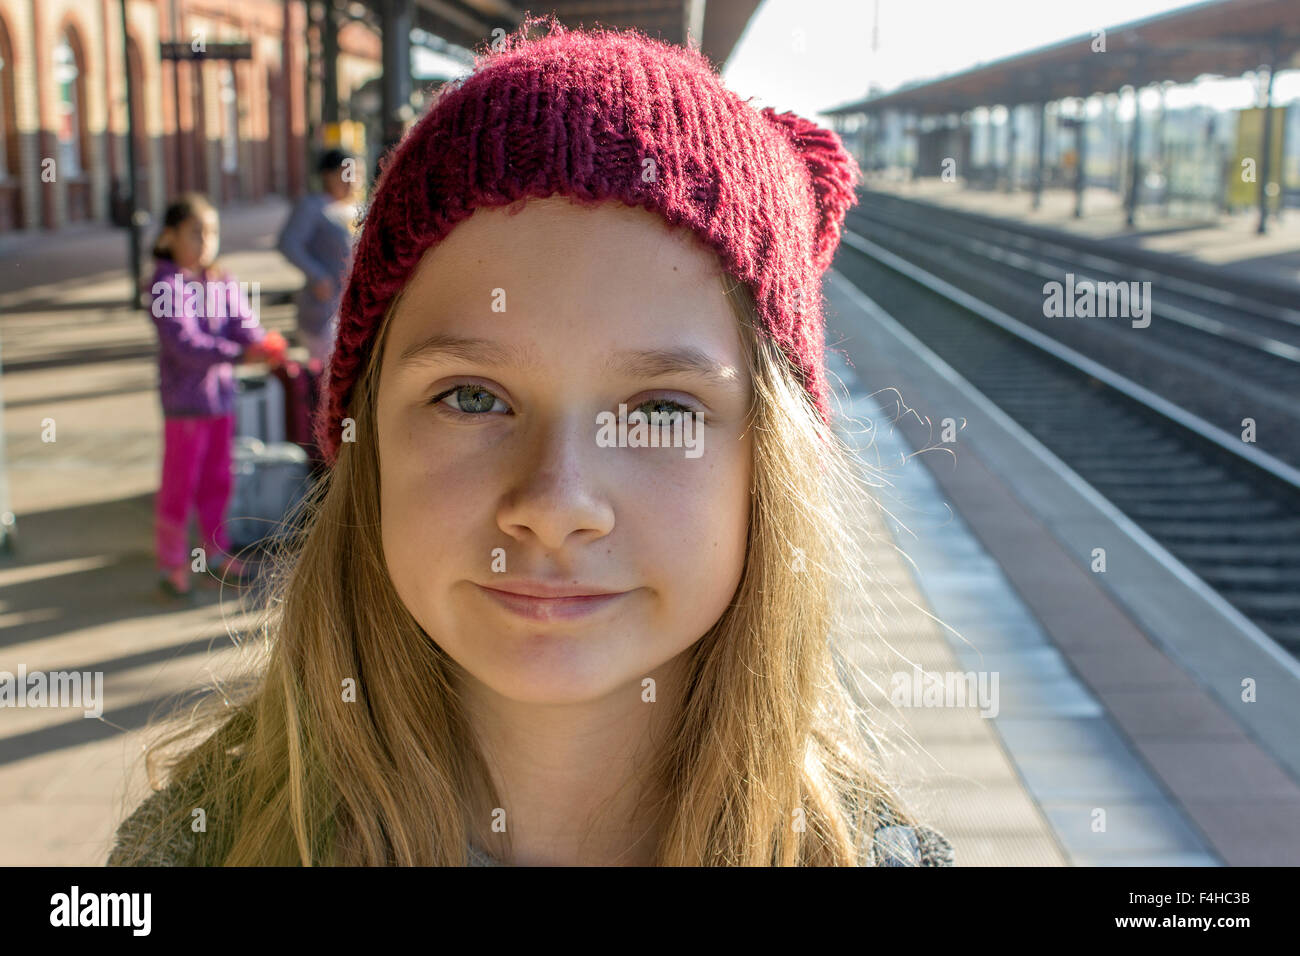 A young girl with long hair at the platform Stock Photo